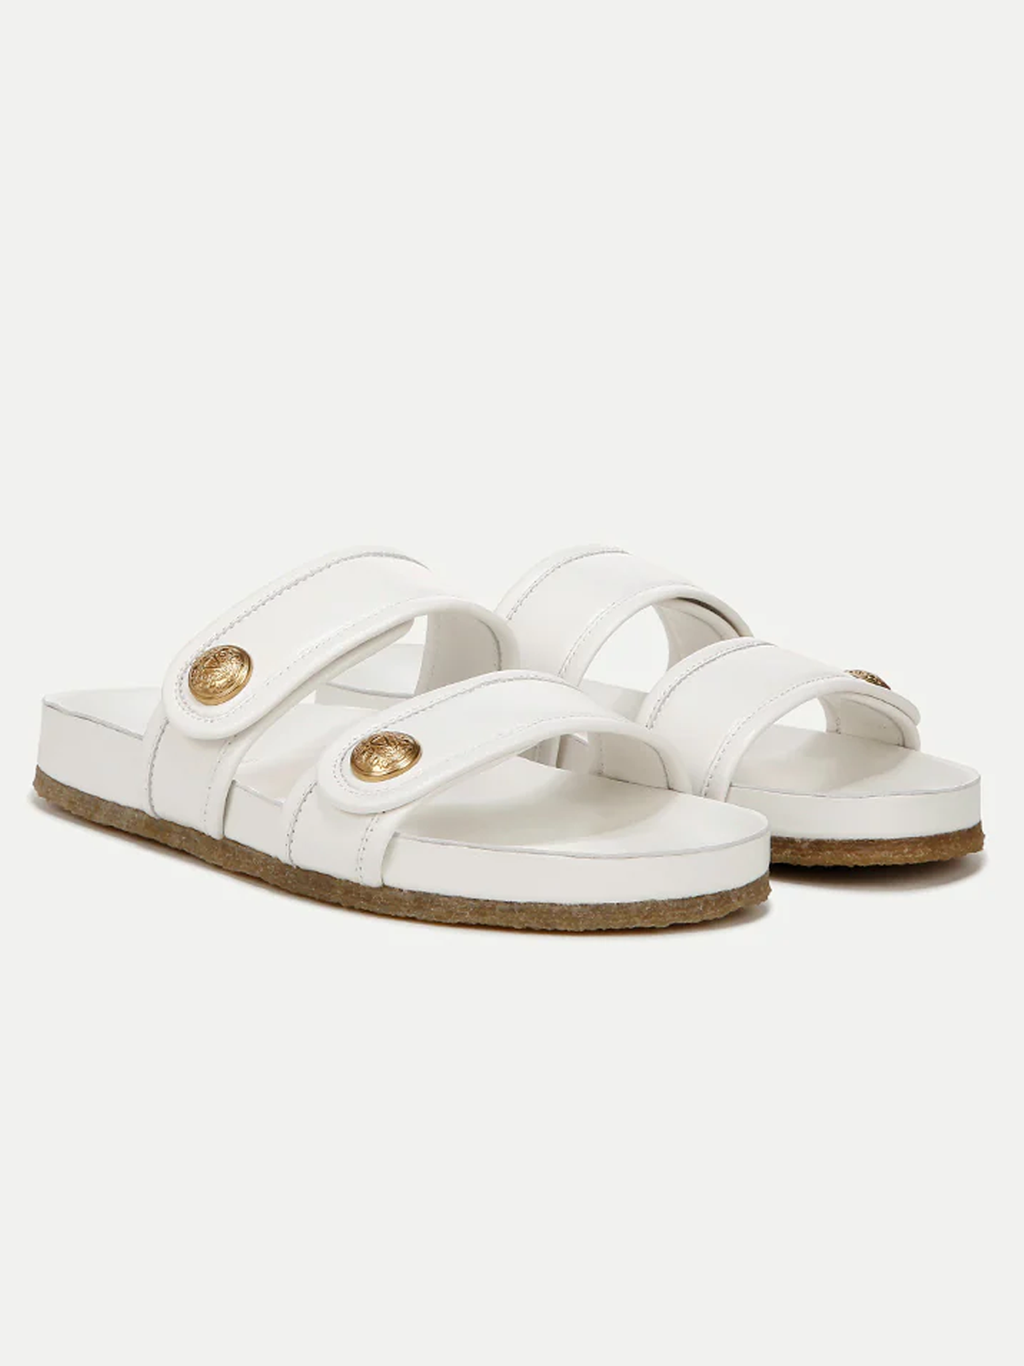 Percey Leather Slide Sandal in Coconut